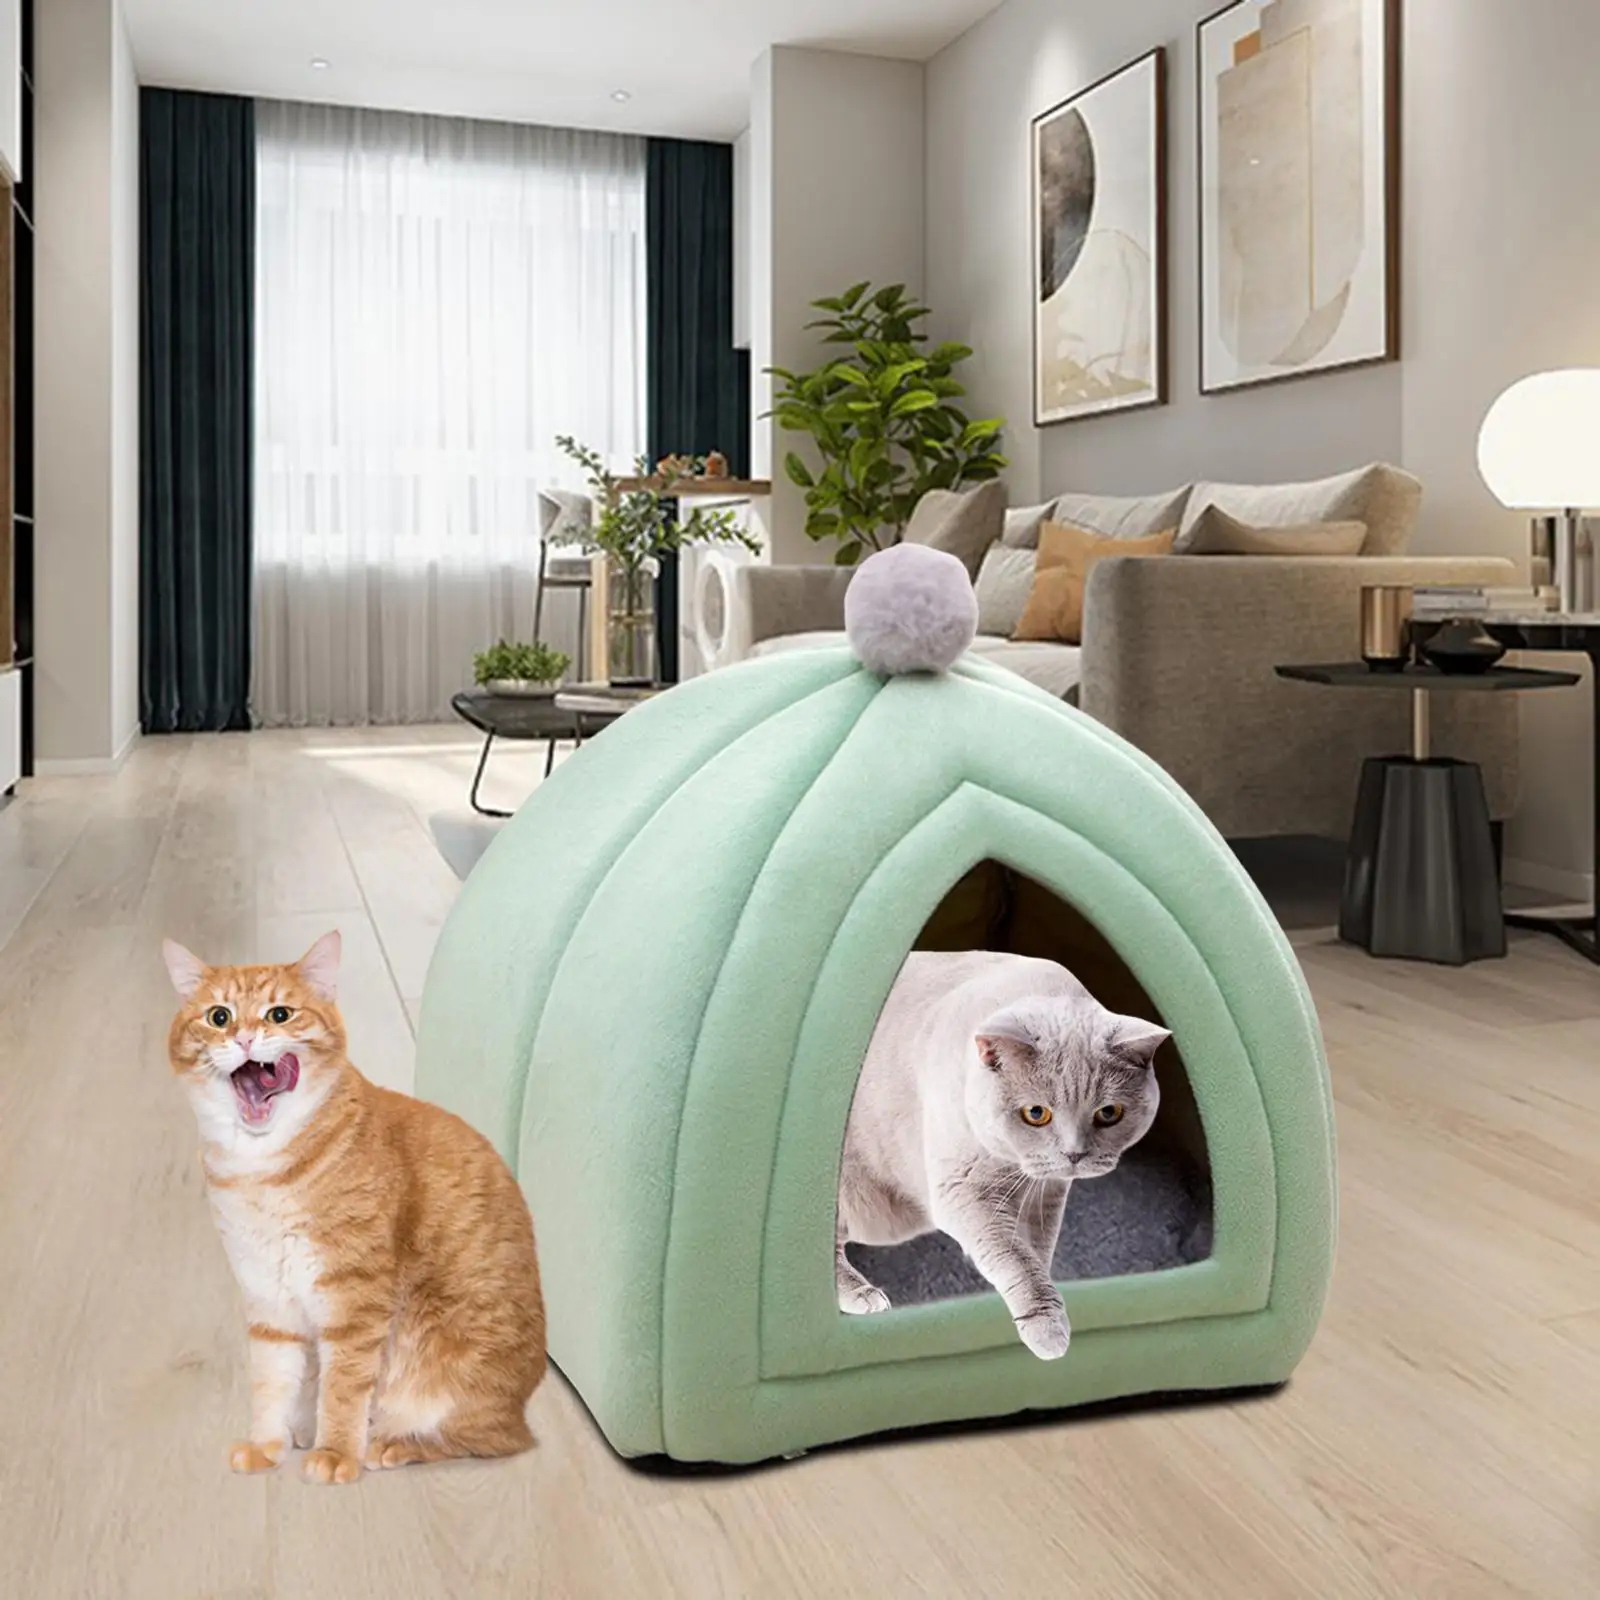 Cat Bed Puppy Kennel Sofa Semi Closed Winter for Cats Dogs Supplies